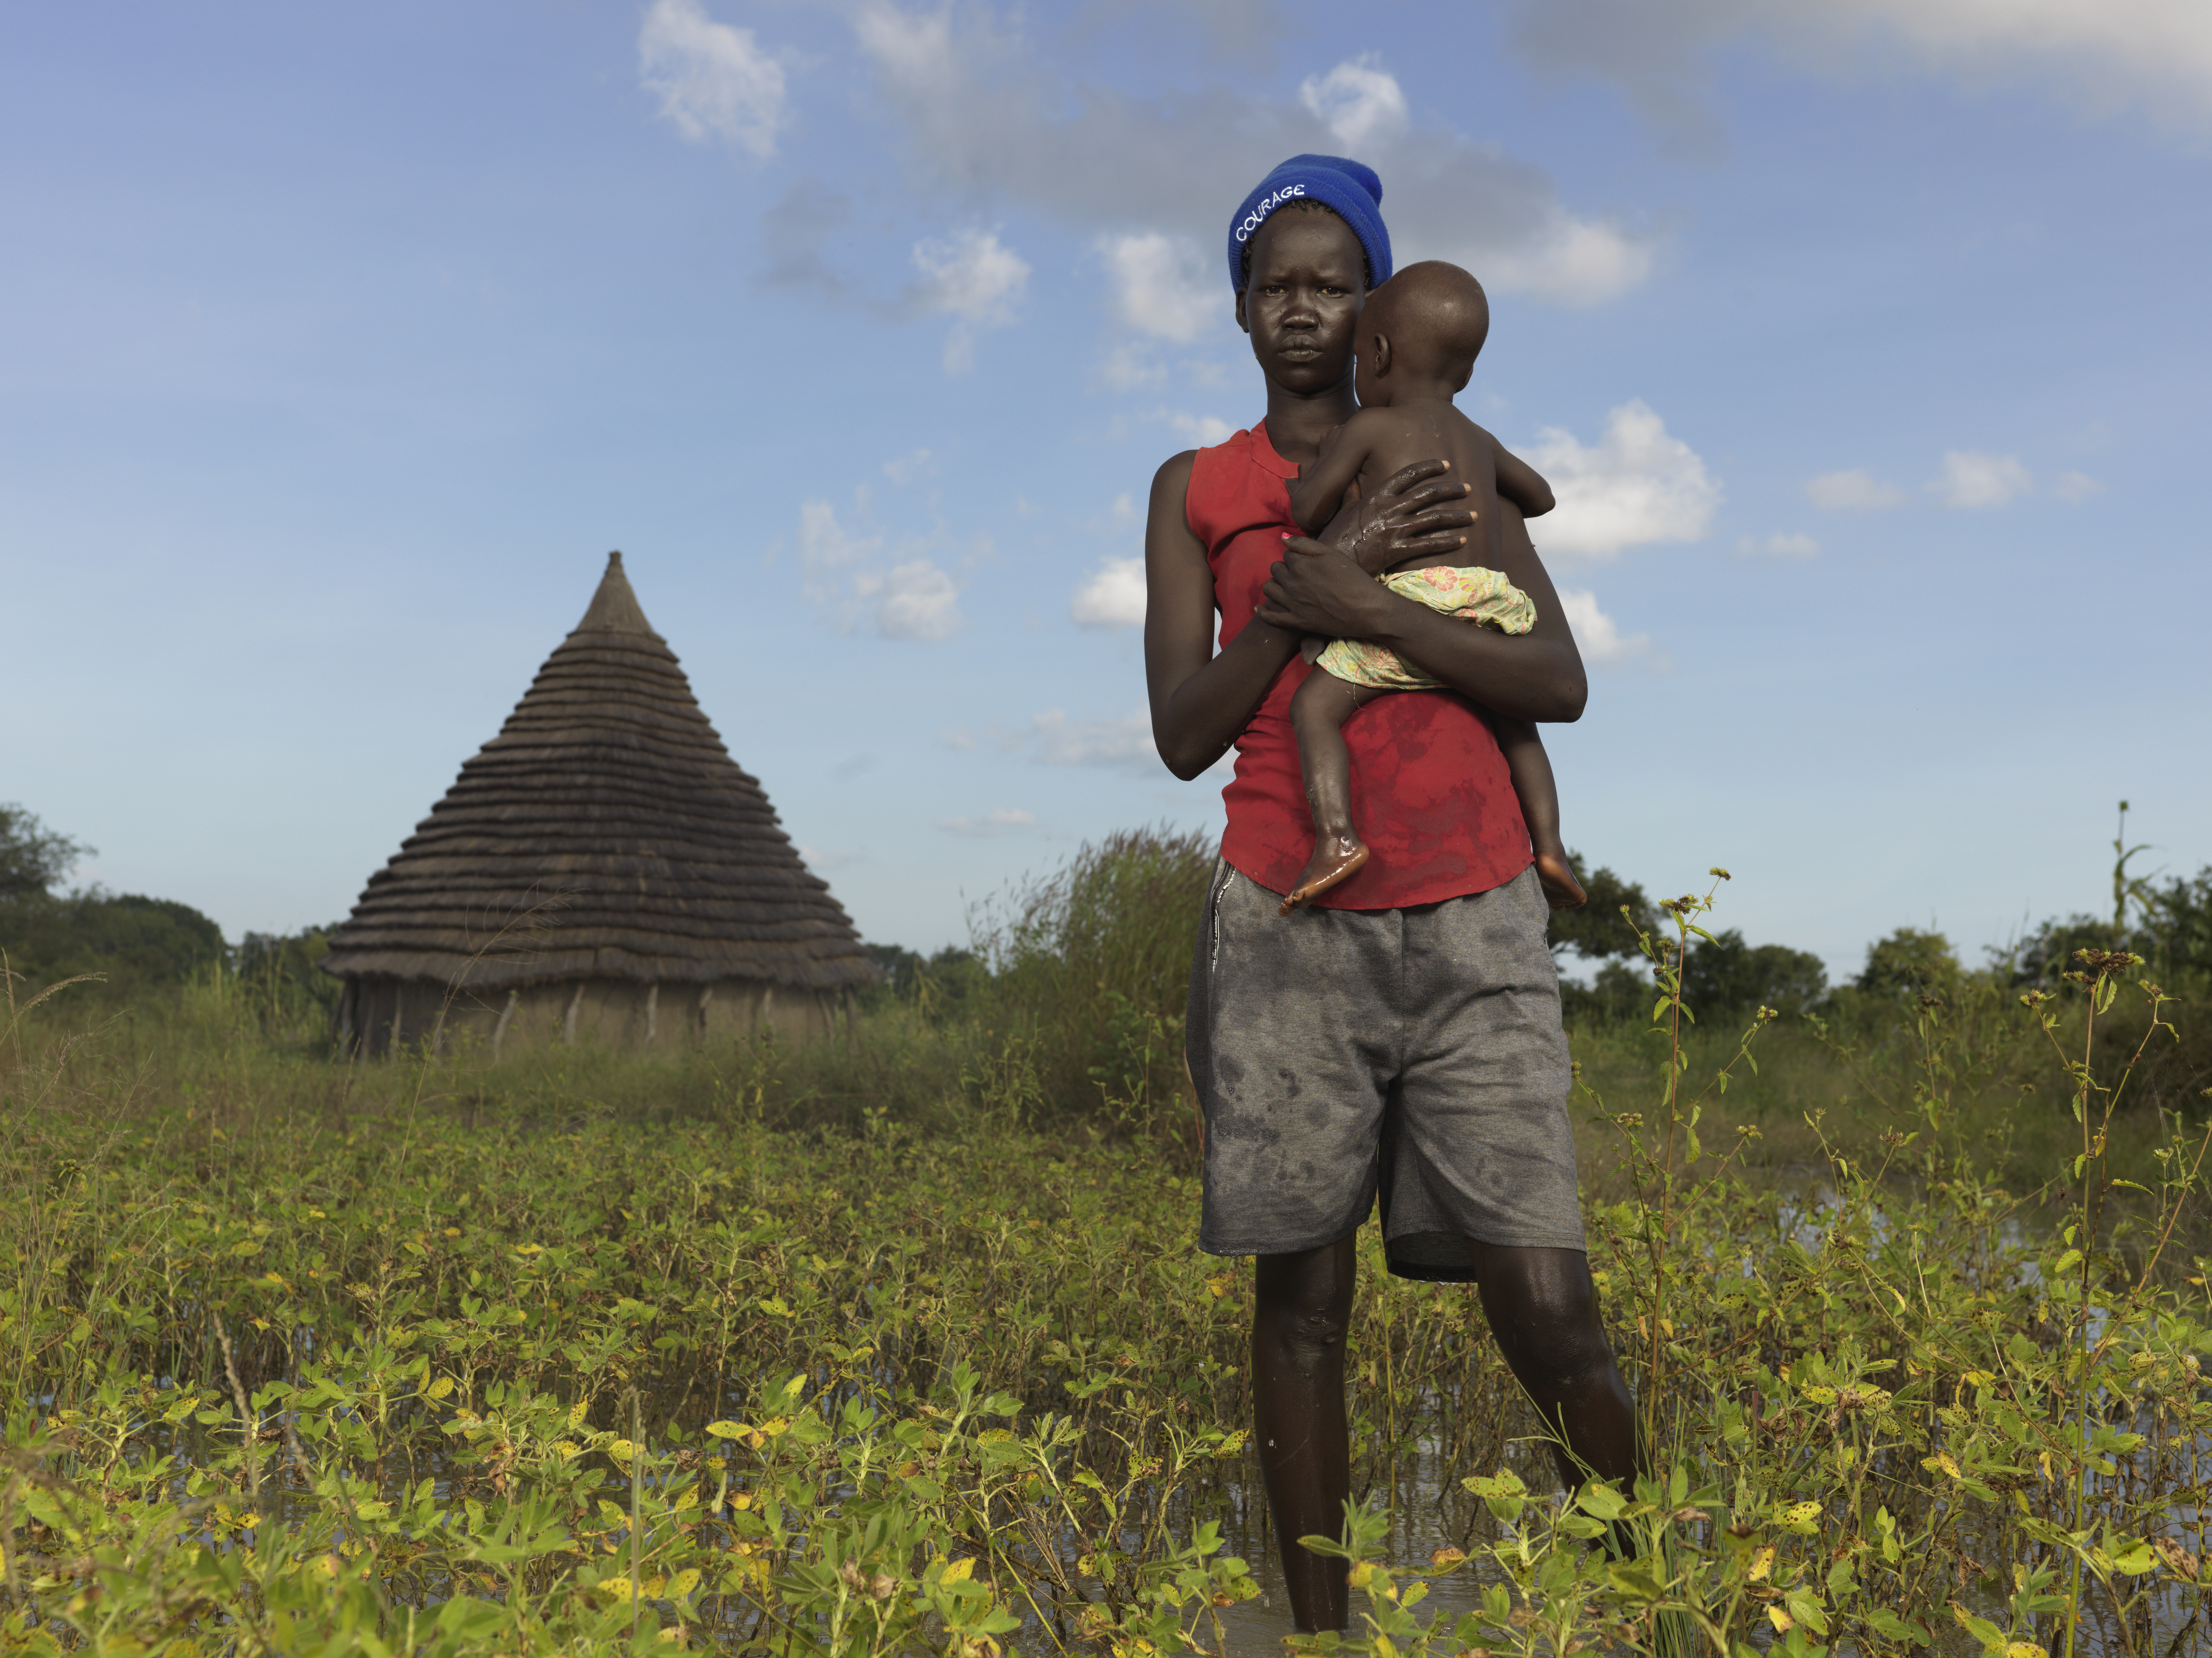 Teenage mother from South Sudan walking in a field while carrying her toddler son in her arms